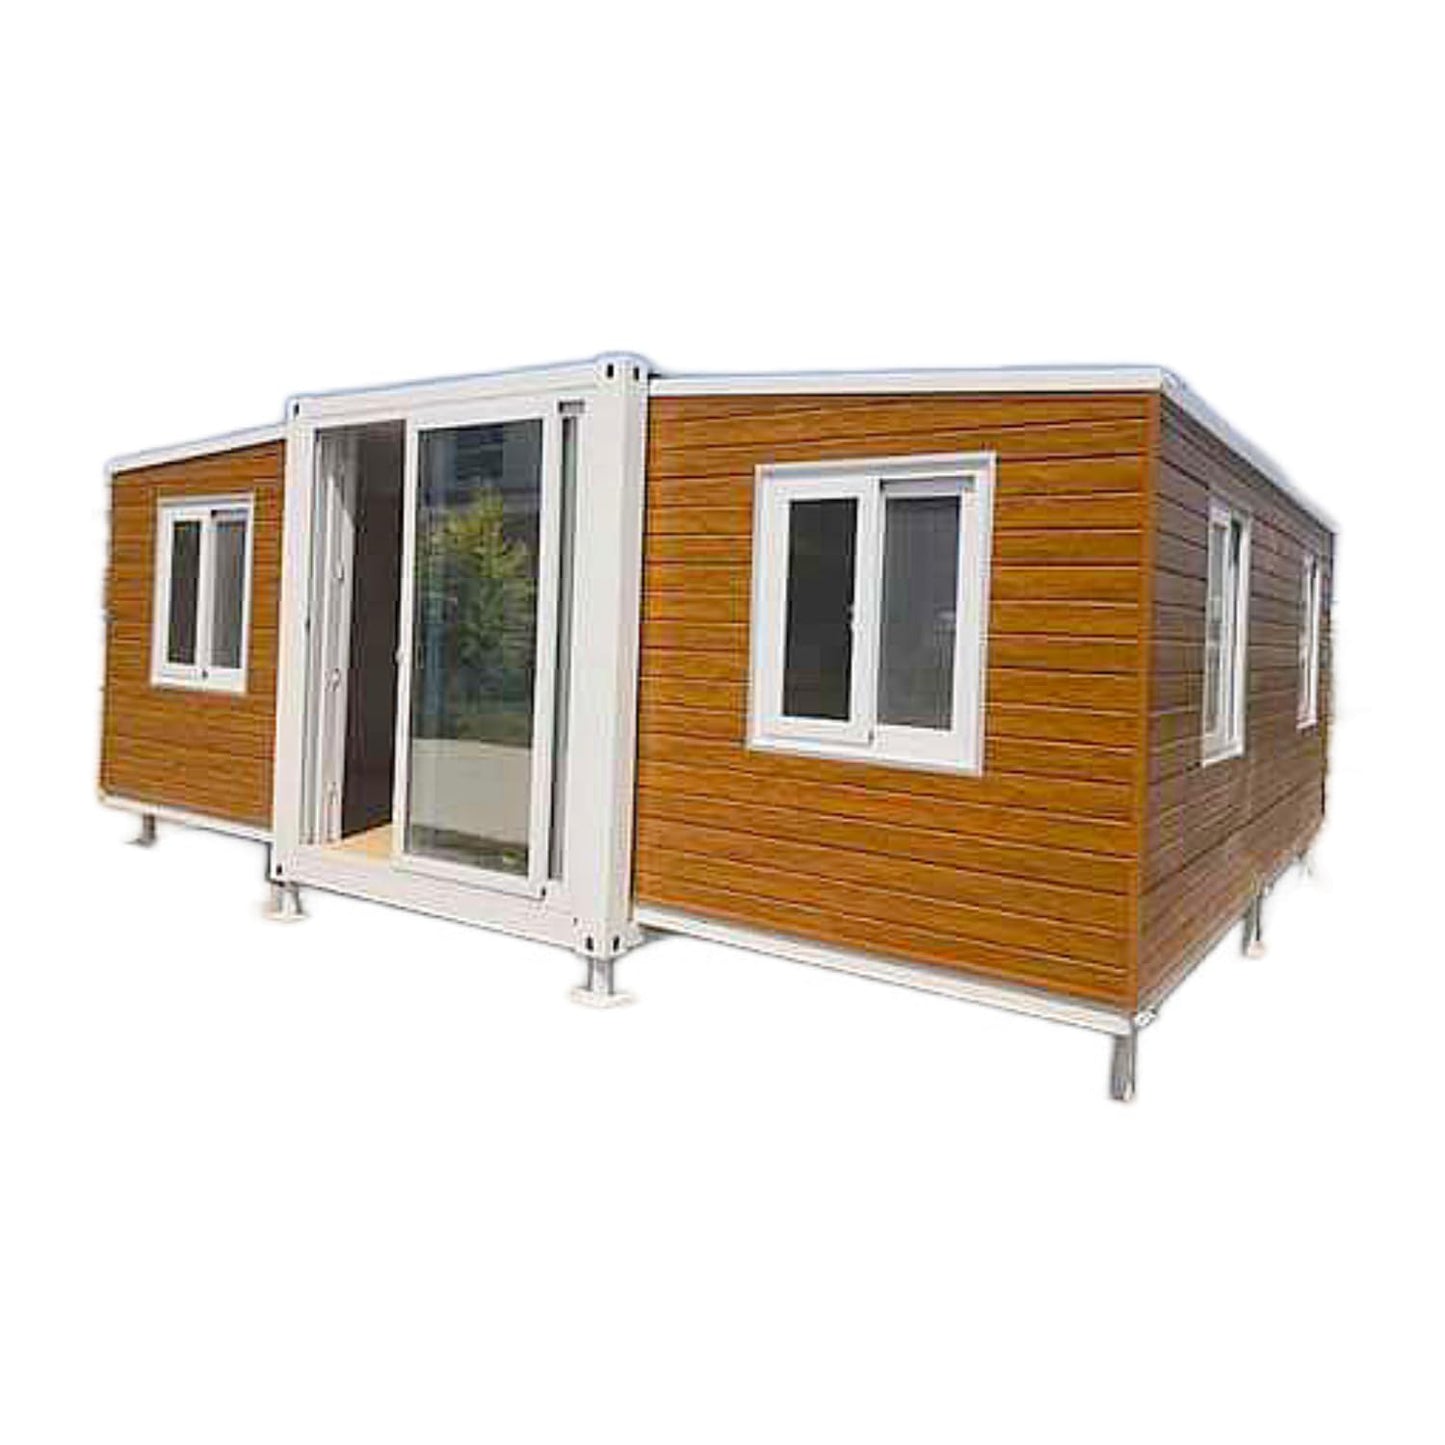 2 Bedroom Expandable Portable House with Kitchen and Bathroom Durable and Spacious